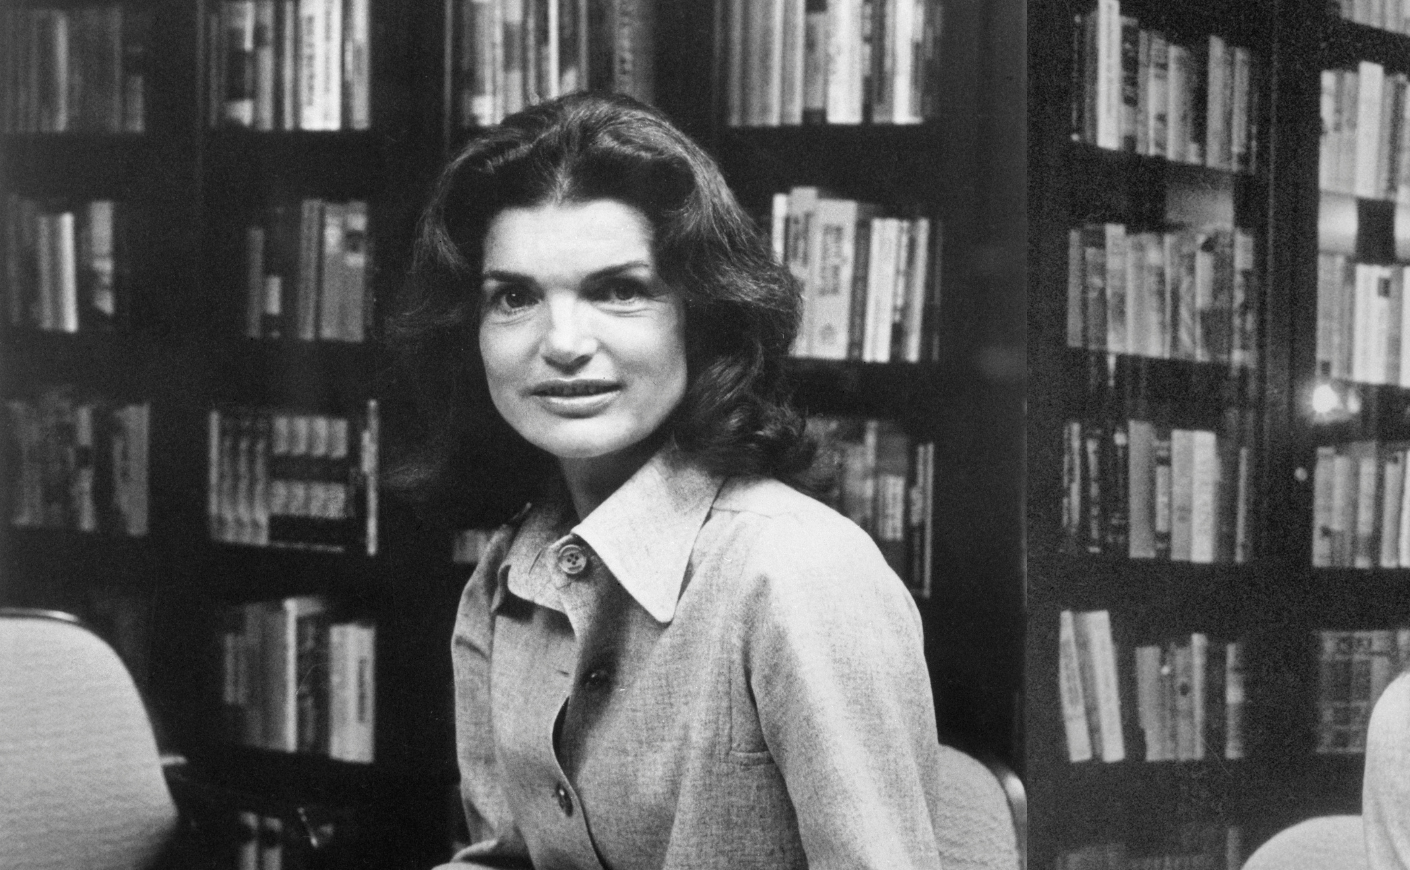 Jackie Kennedy sits in front of bookshelves